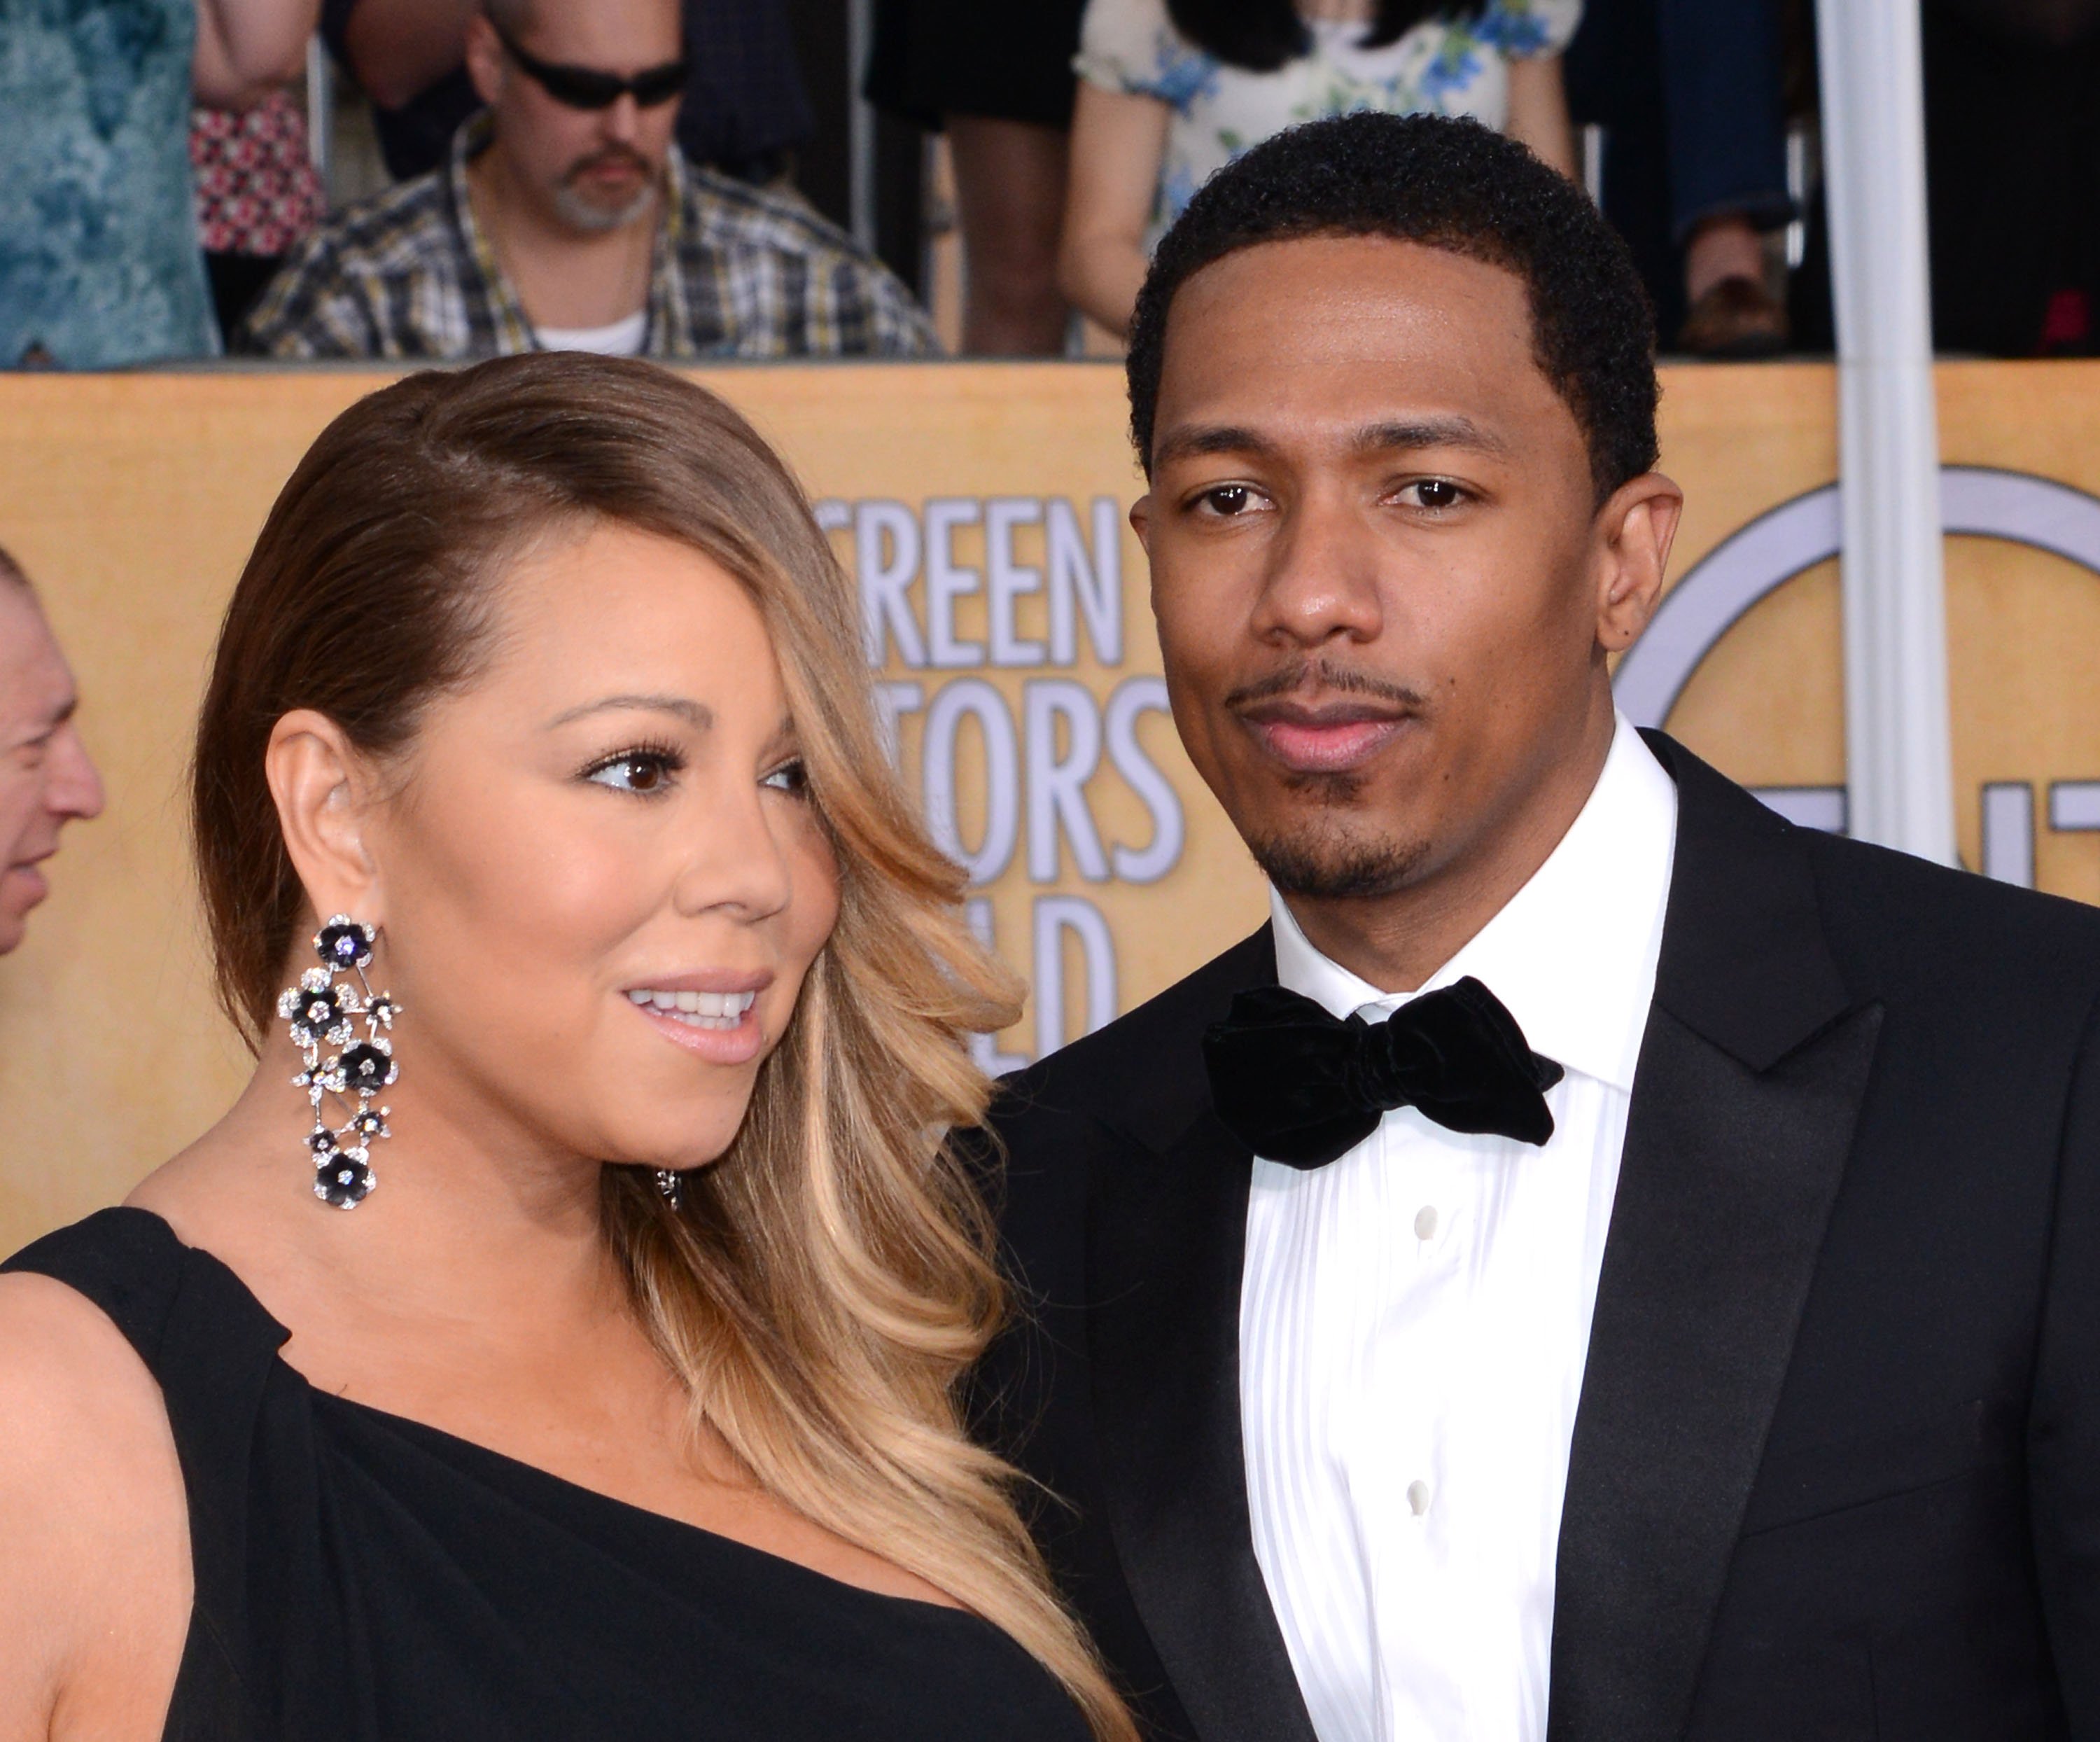 Mariah Carey and Husband Nick Cannon arrive at the 20th Annual Screen Actors Guild Awards at The Shrine Auditorium on January 18, 2014, in Los Angeles, California. | Source: Getty Images.